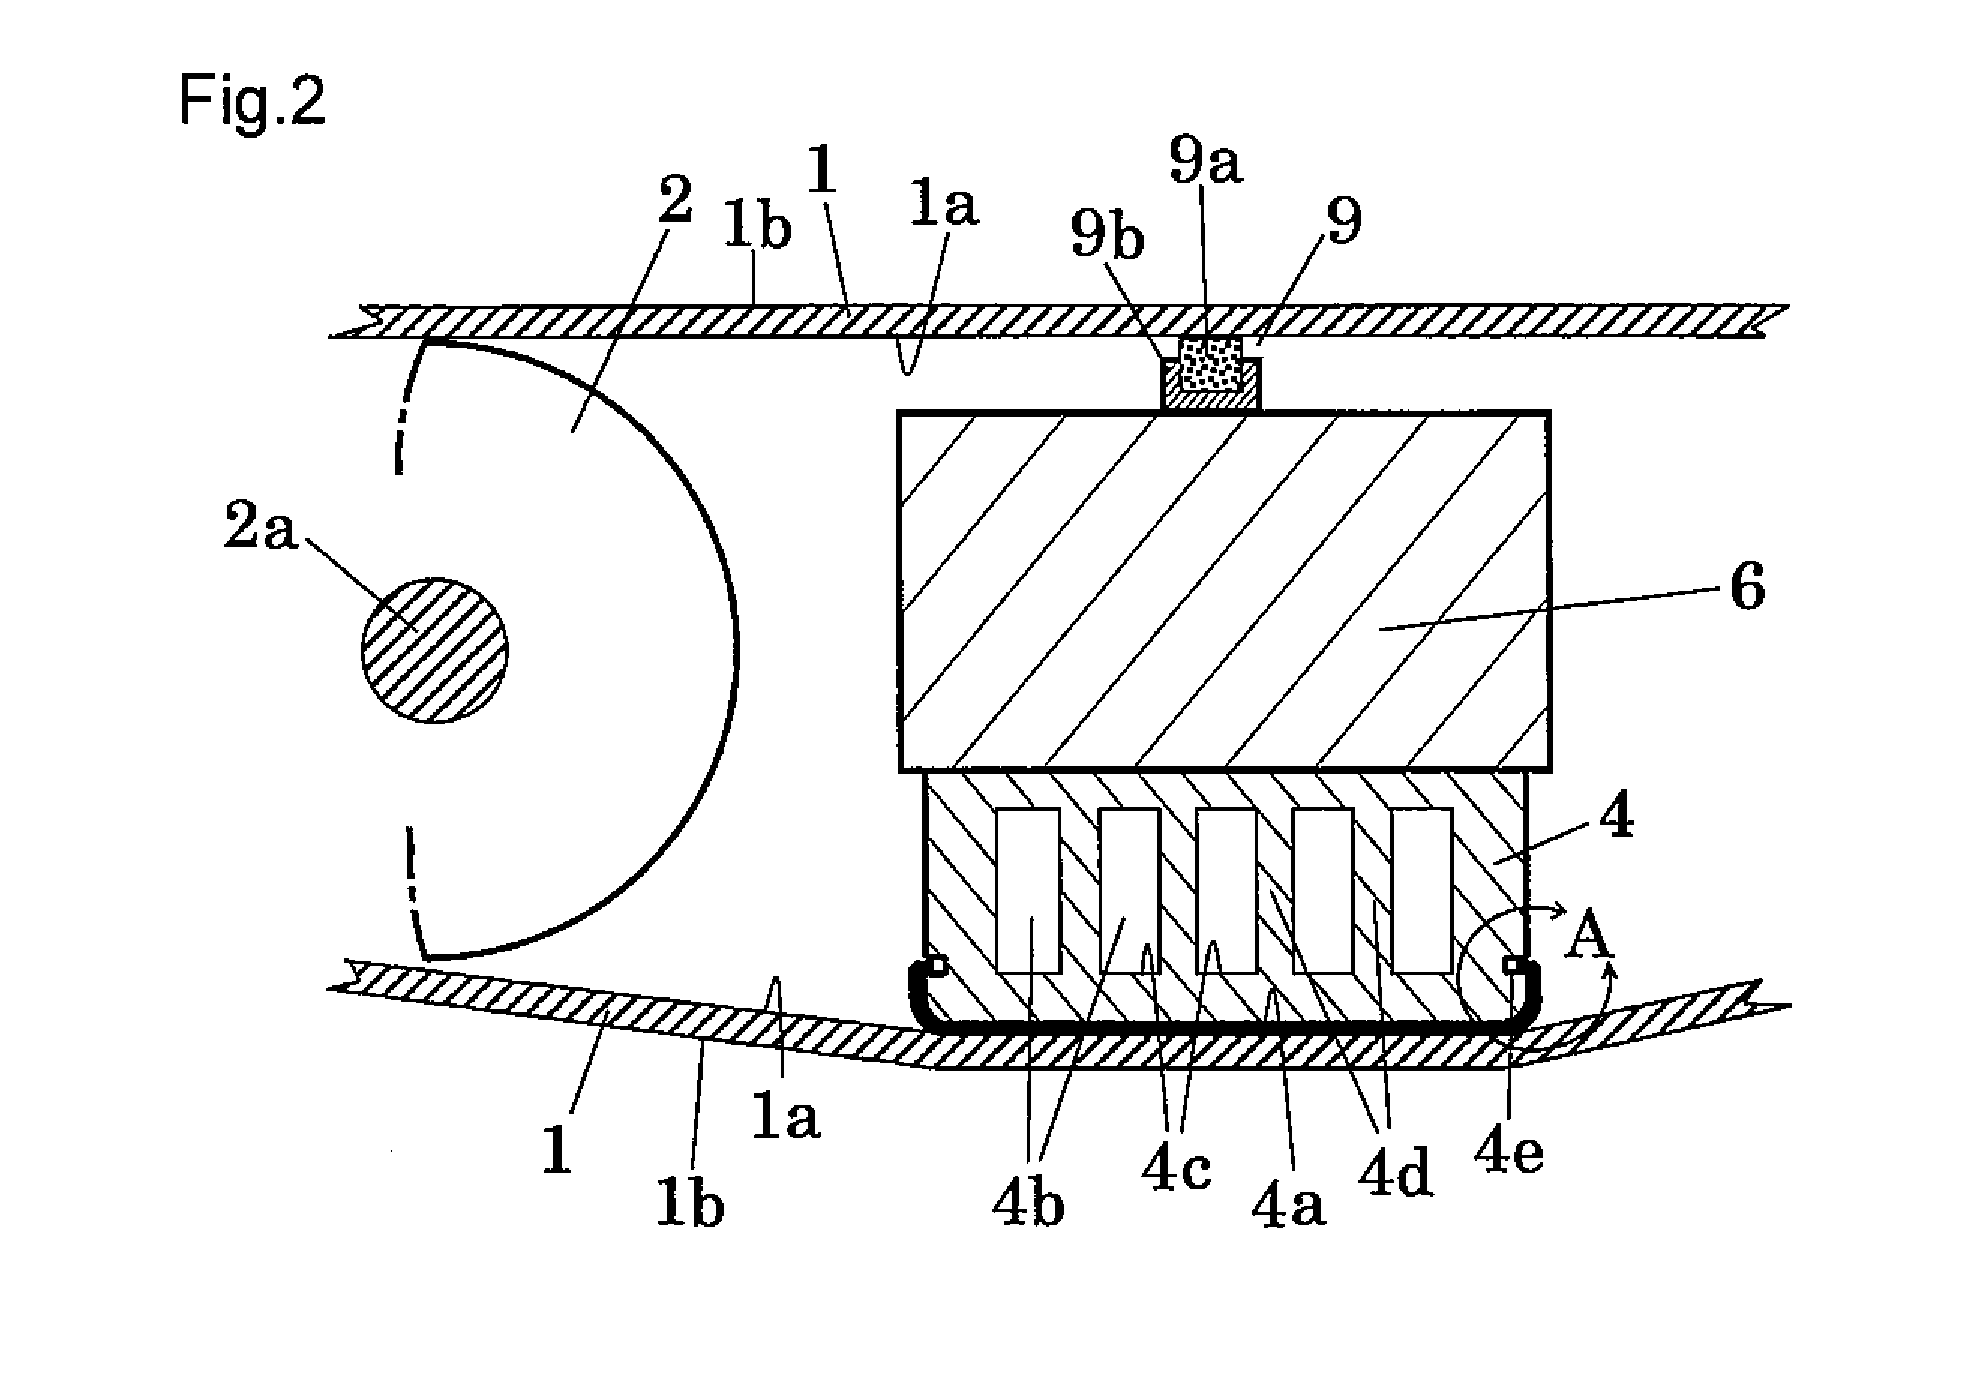 Multiple endless belt type band sheet coiling tension applying apparatus